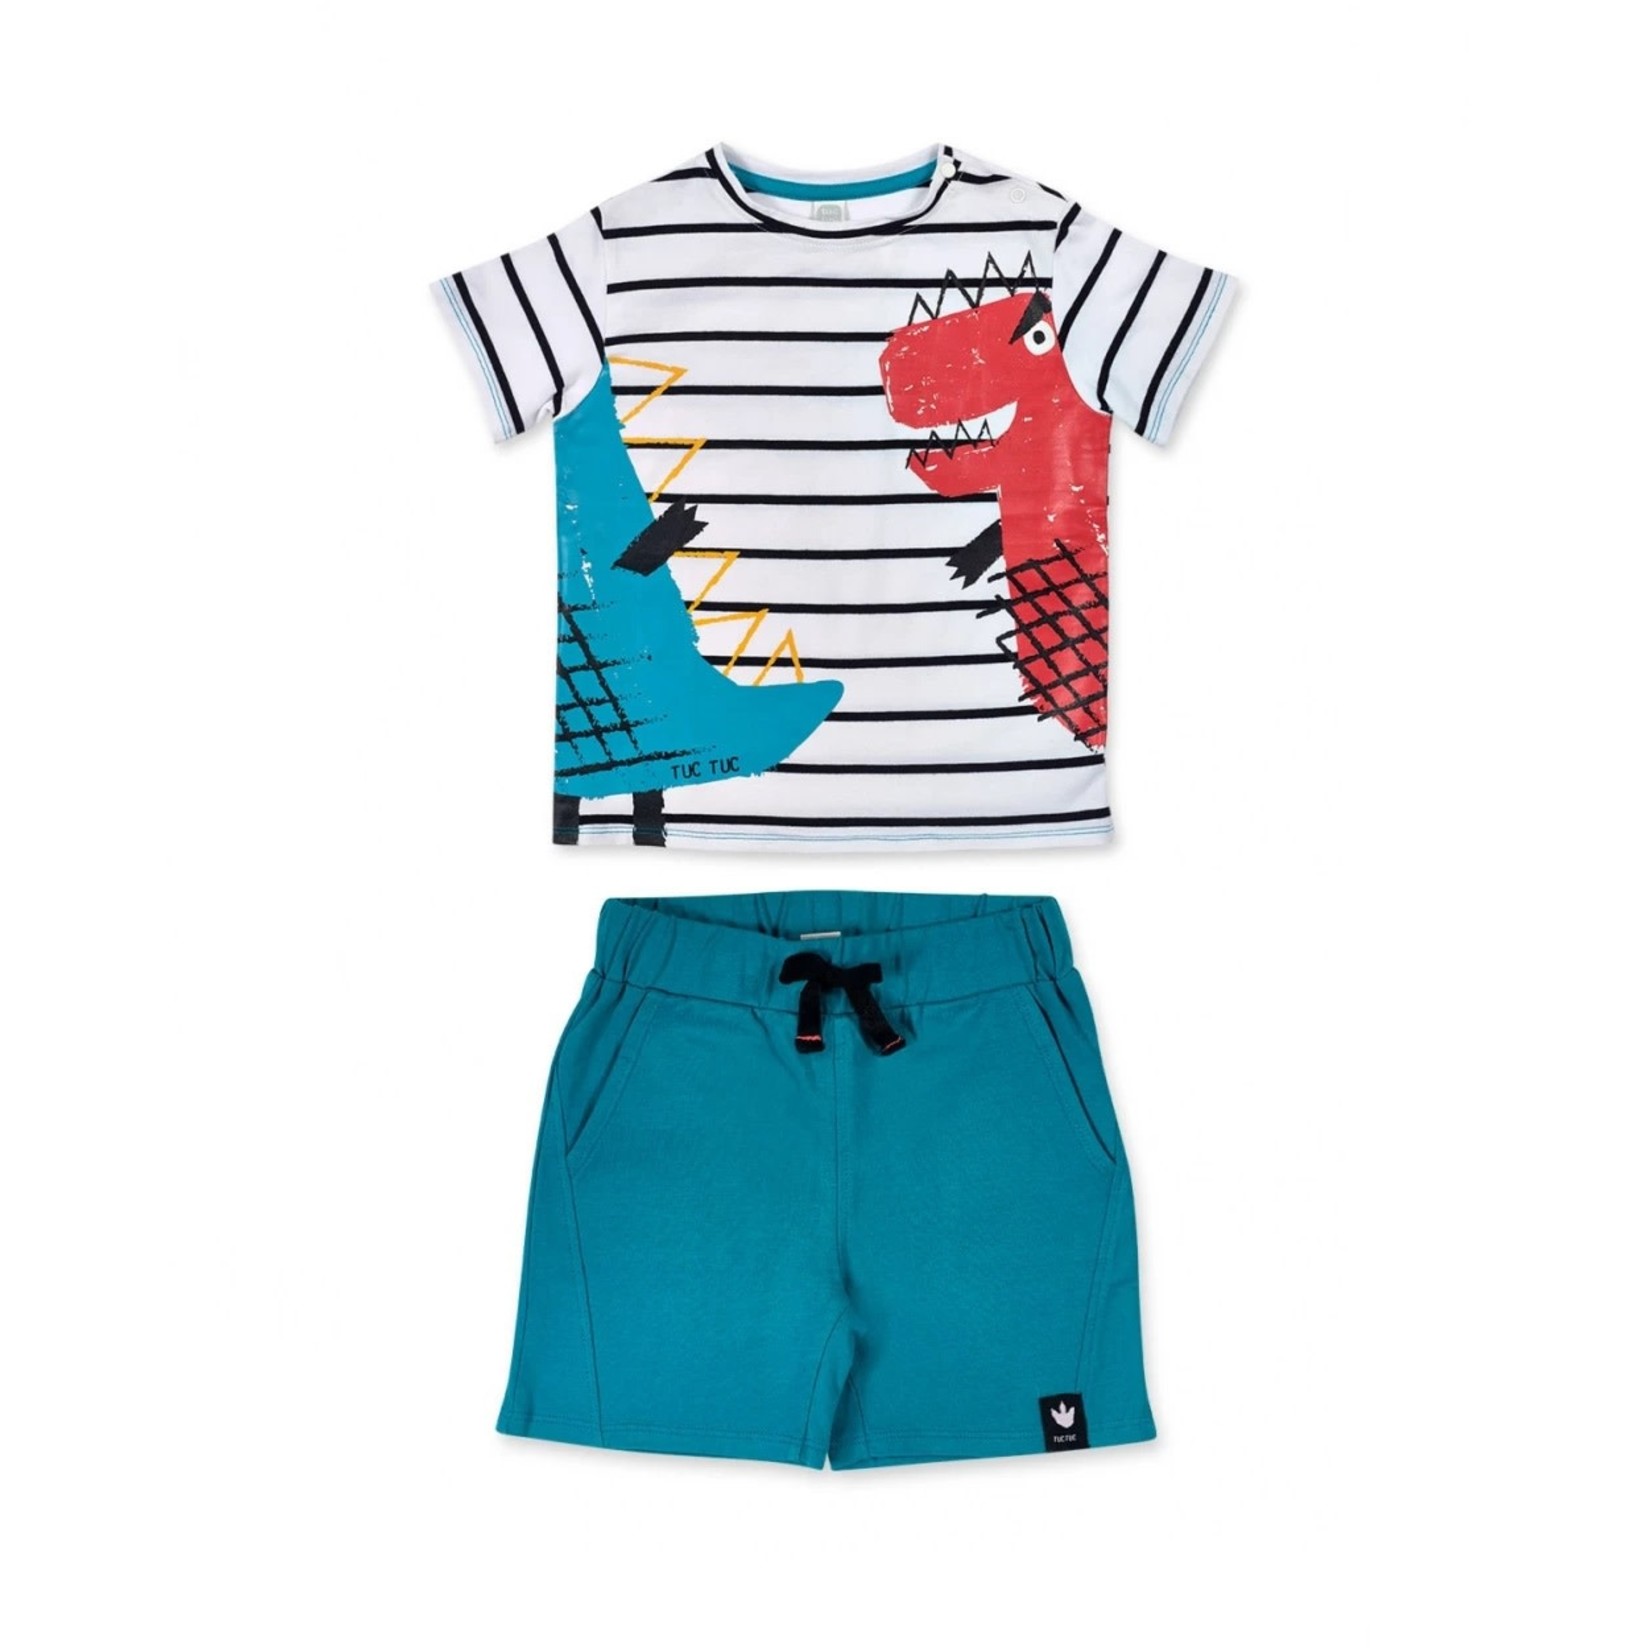 TucTuc TUC TUC - Two-piece Set Striped T-Shirt with Dino Print and Turquoise Shorts 'Fruity Dinosaurs'